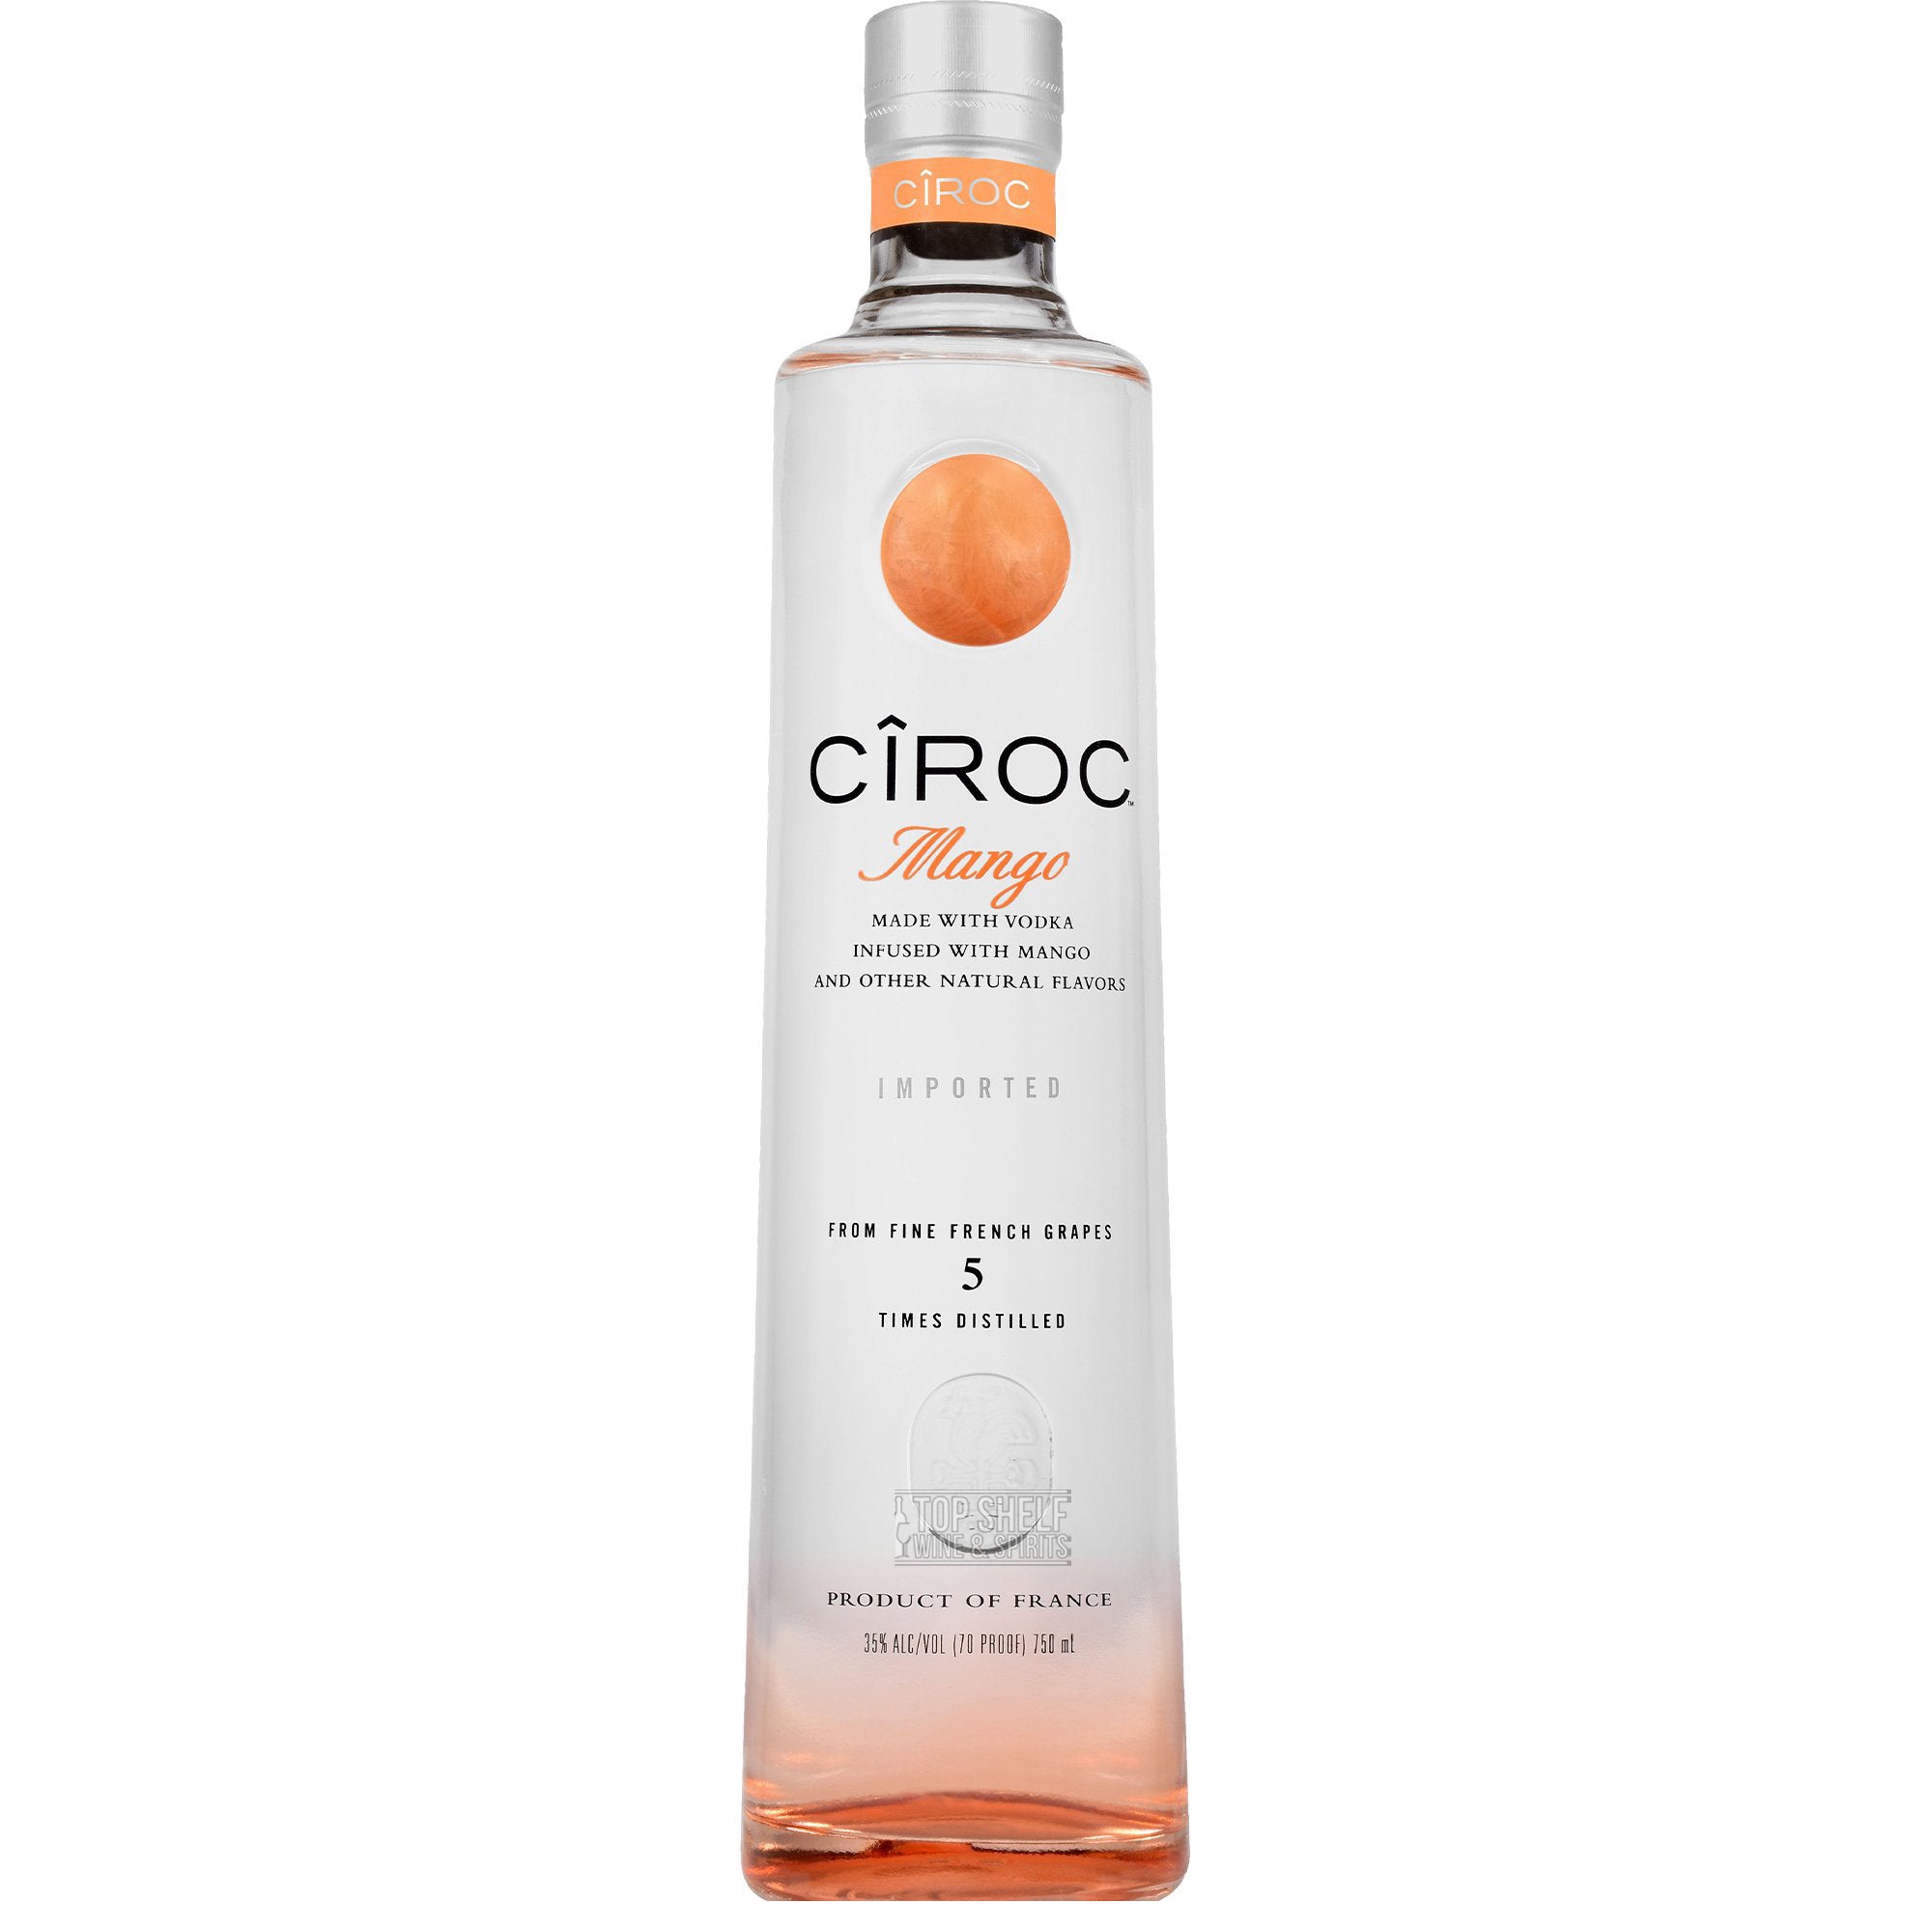 Ciroc Apple, 750 ml (Made with Vodka infused with Natural Flavors), 35% ABV  